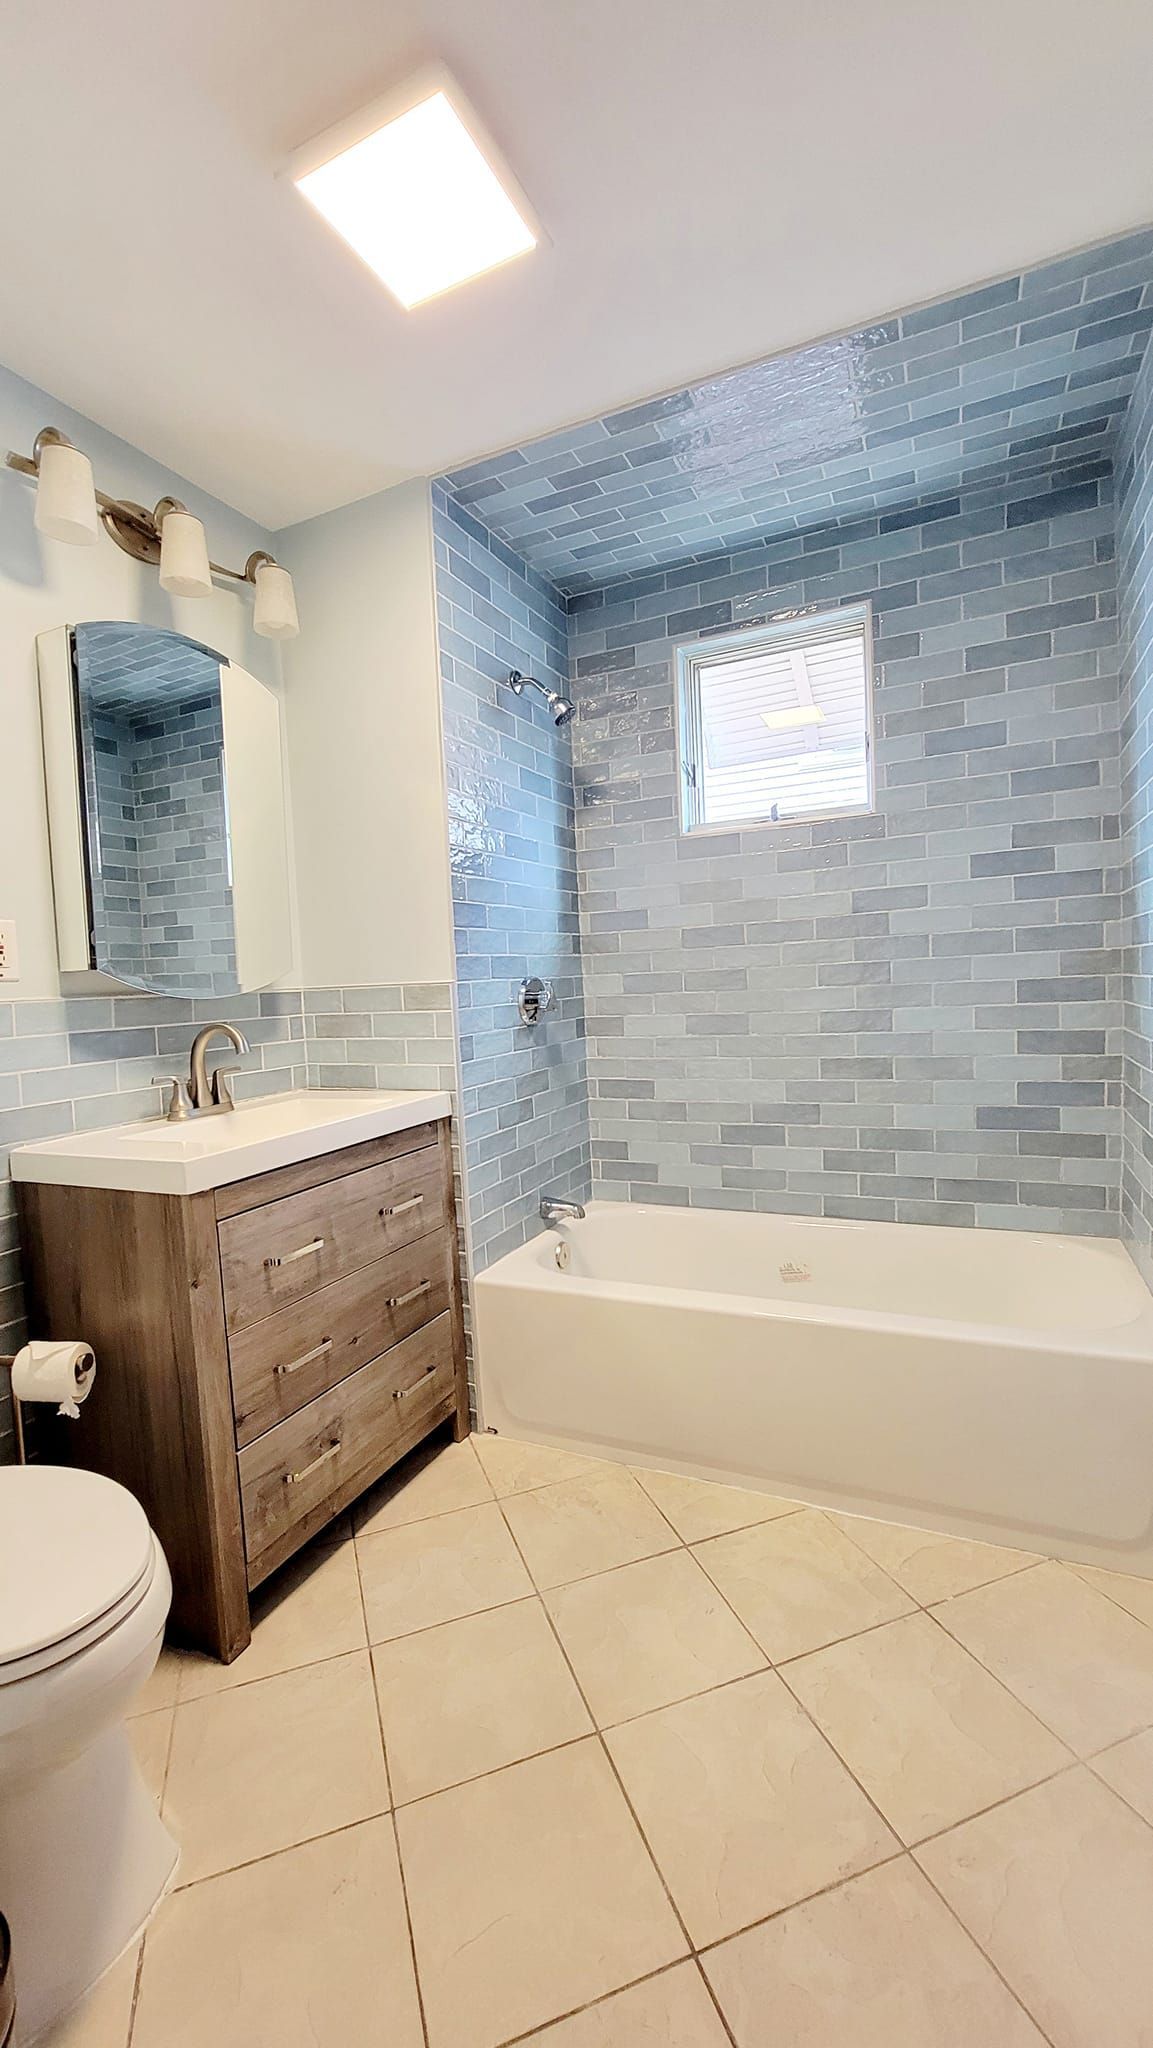 Local Bathroom Remodeling Contractor with Excellent Reviews